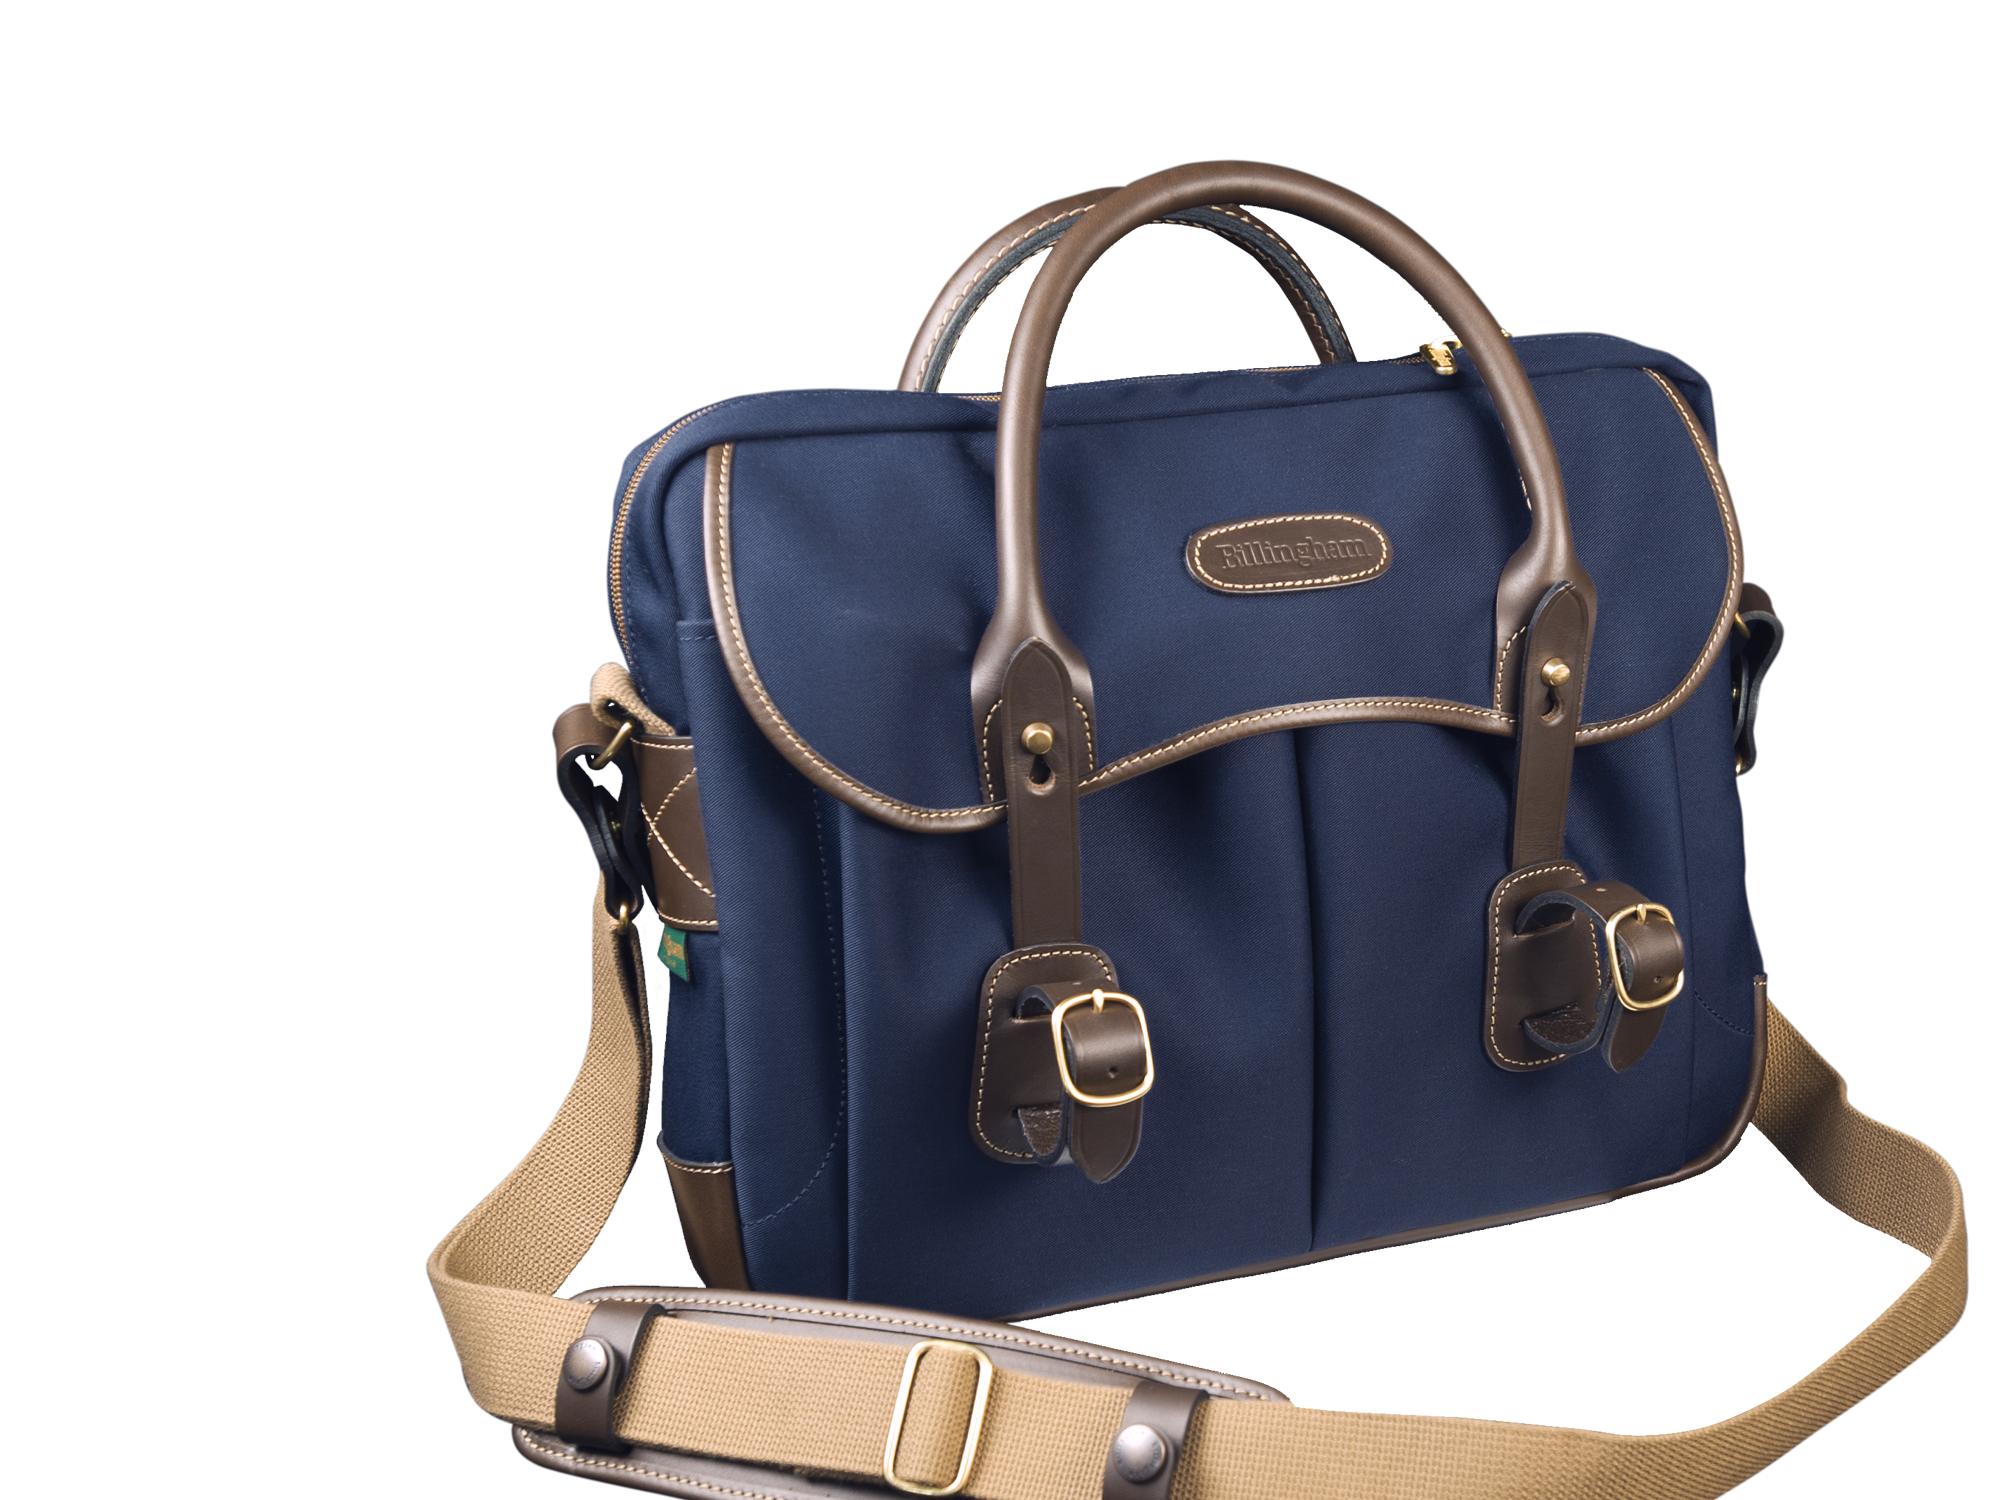 Consumer Diary: Slider Bags and Lost or Delayed Luggage - We-Ha